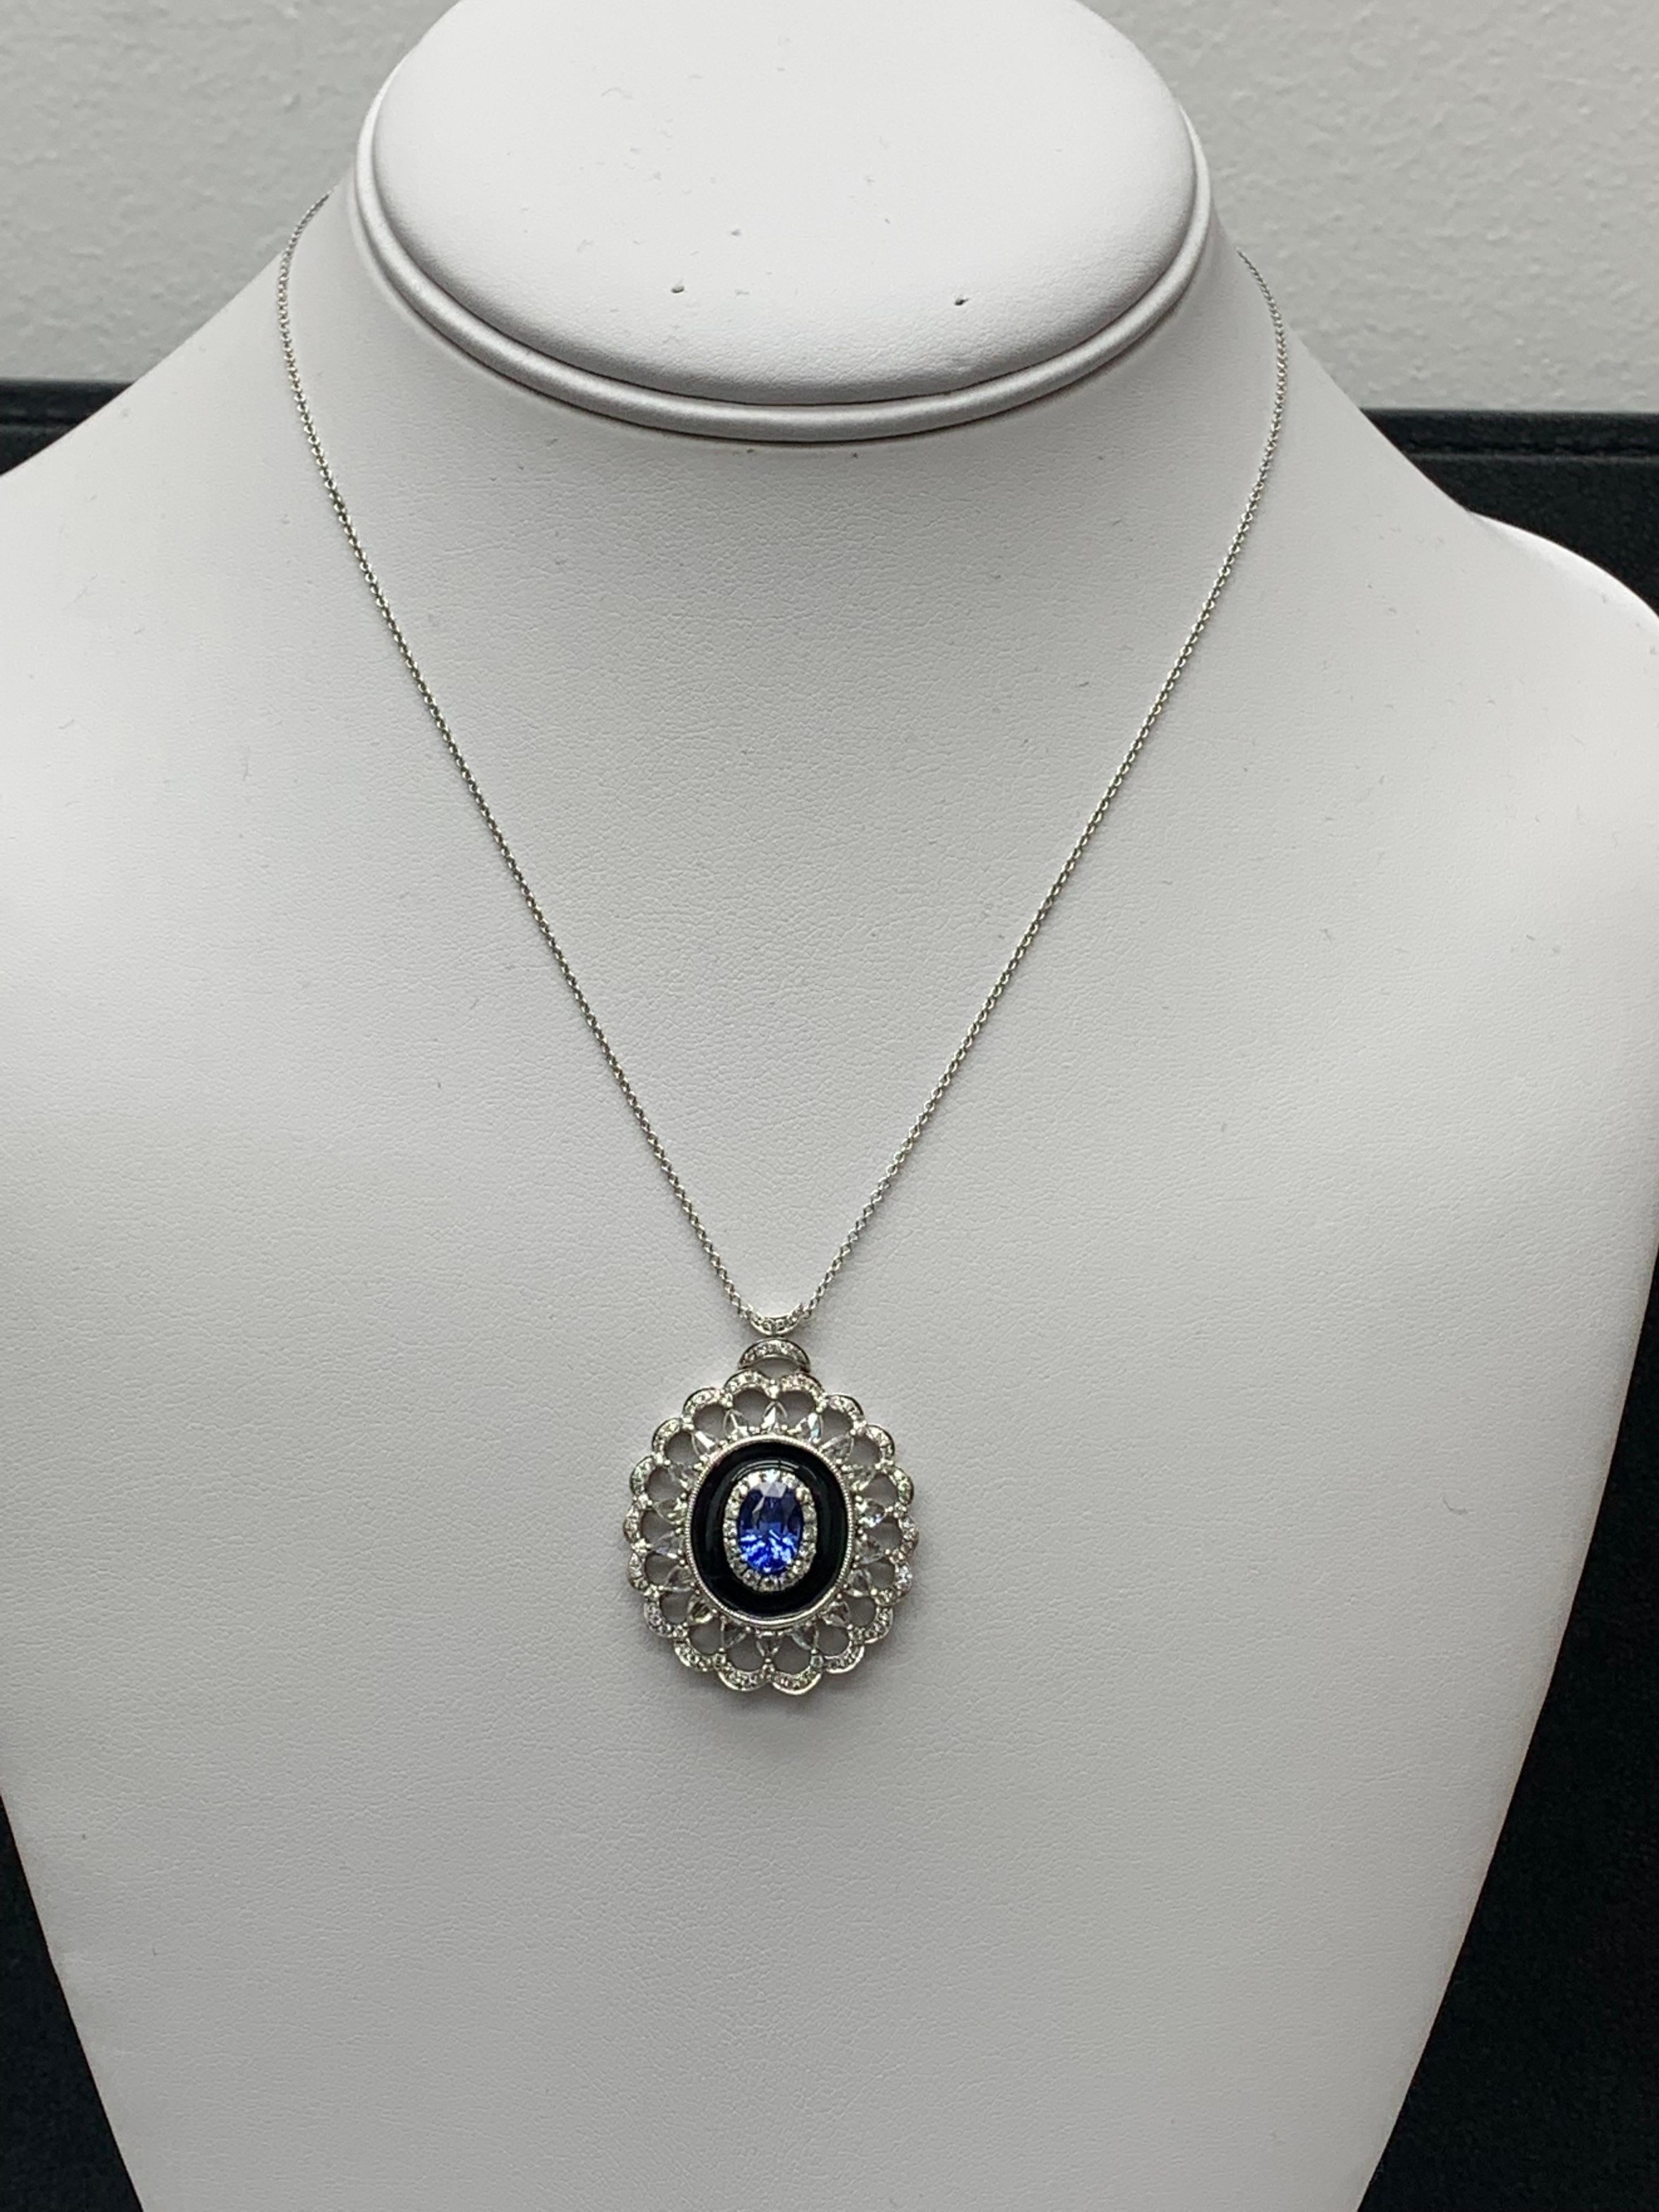 1.50 Carat Oval Cut Sapphire and Diamond Flower Pendant Necklace 18k White Gold For Sale 4